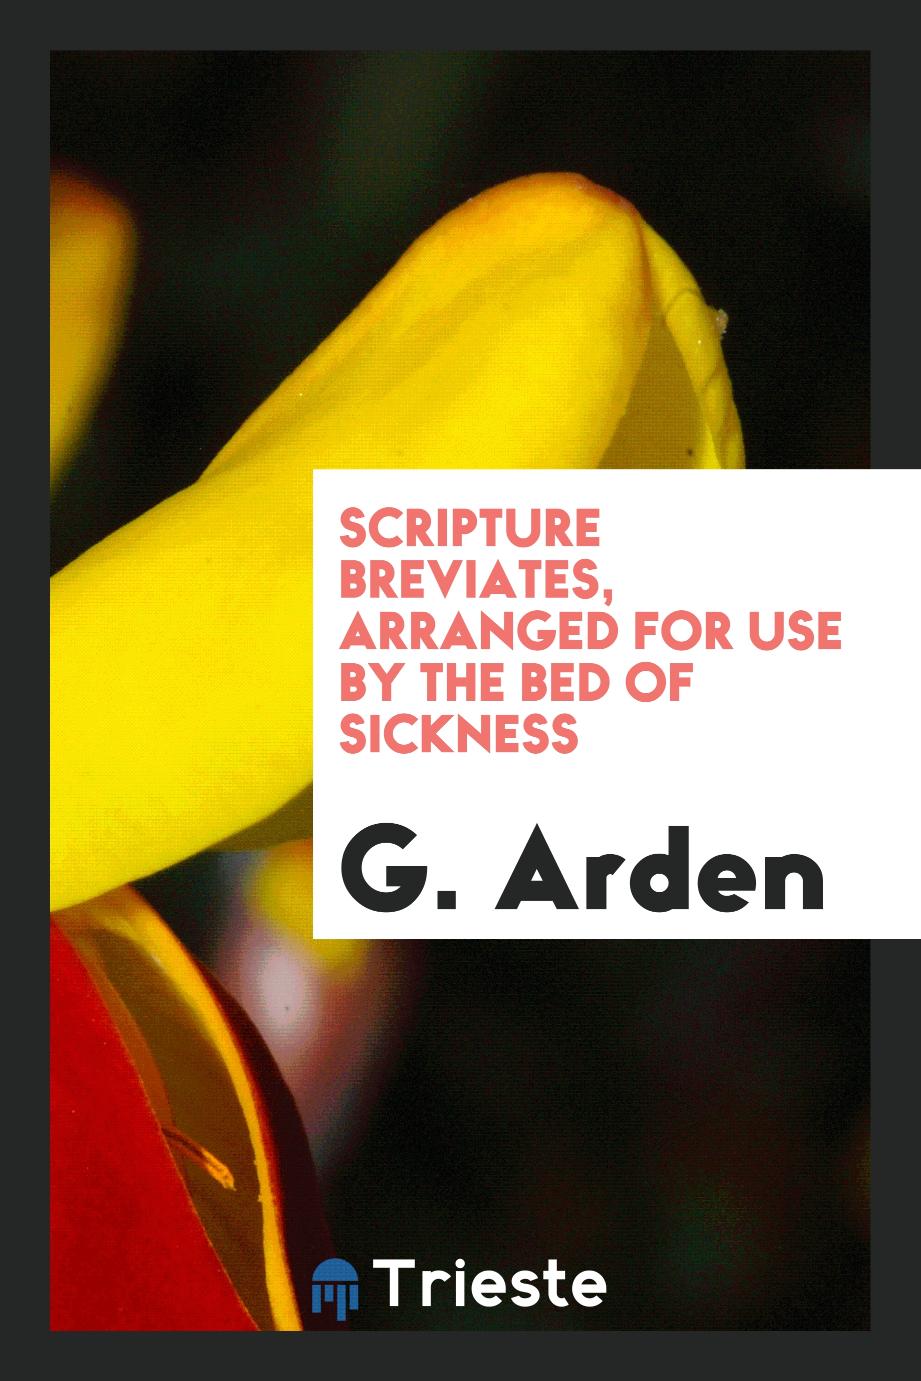 Scripture Breviates, Arranged for Use by the Bed of Sickness